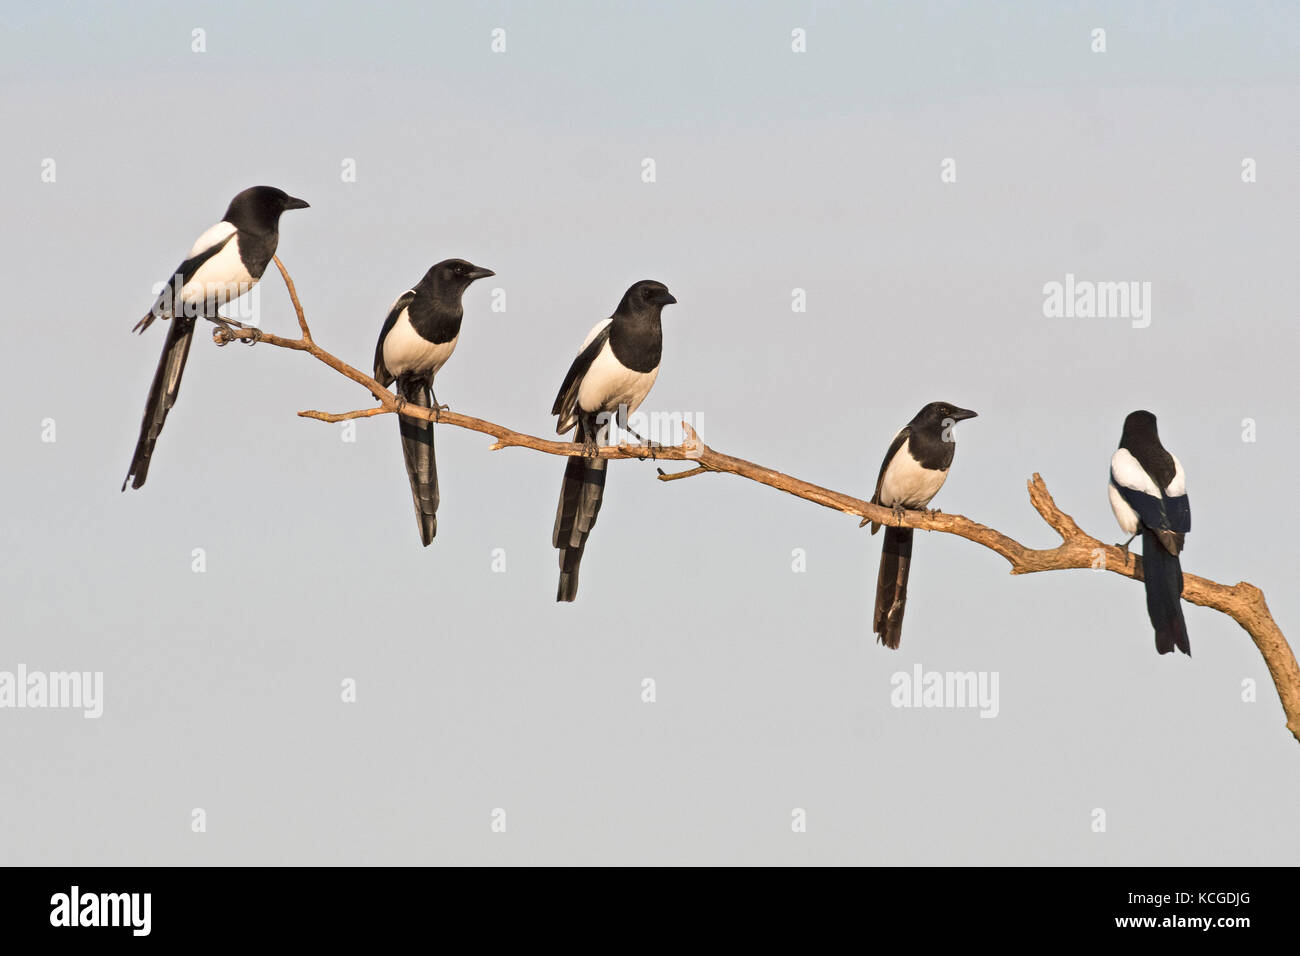 Eurasian Magpies Pica pica gathering prior to going to roost Hortobagy National Park Hungary January Stock Photo